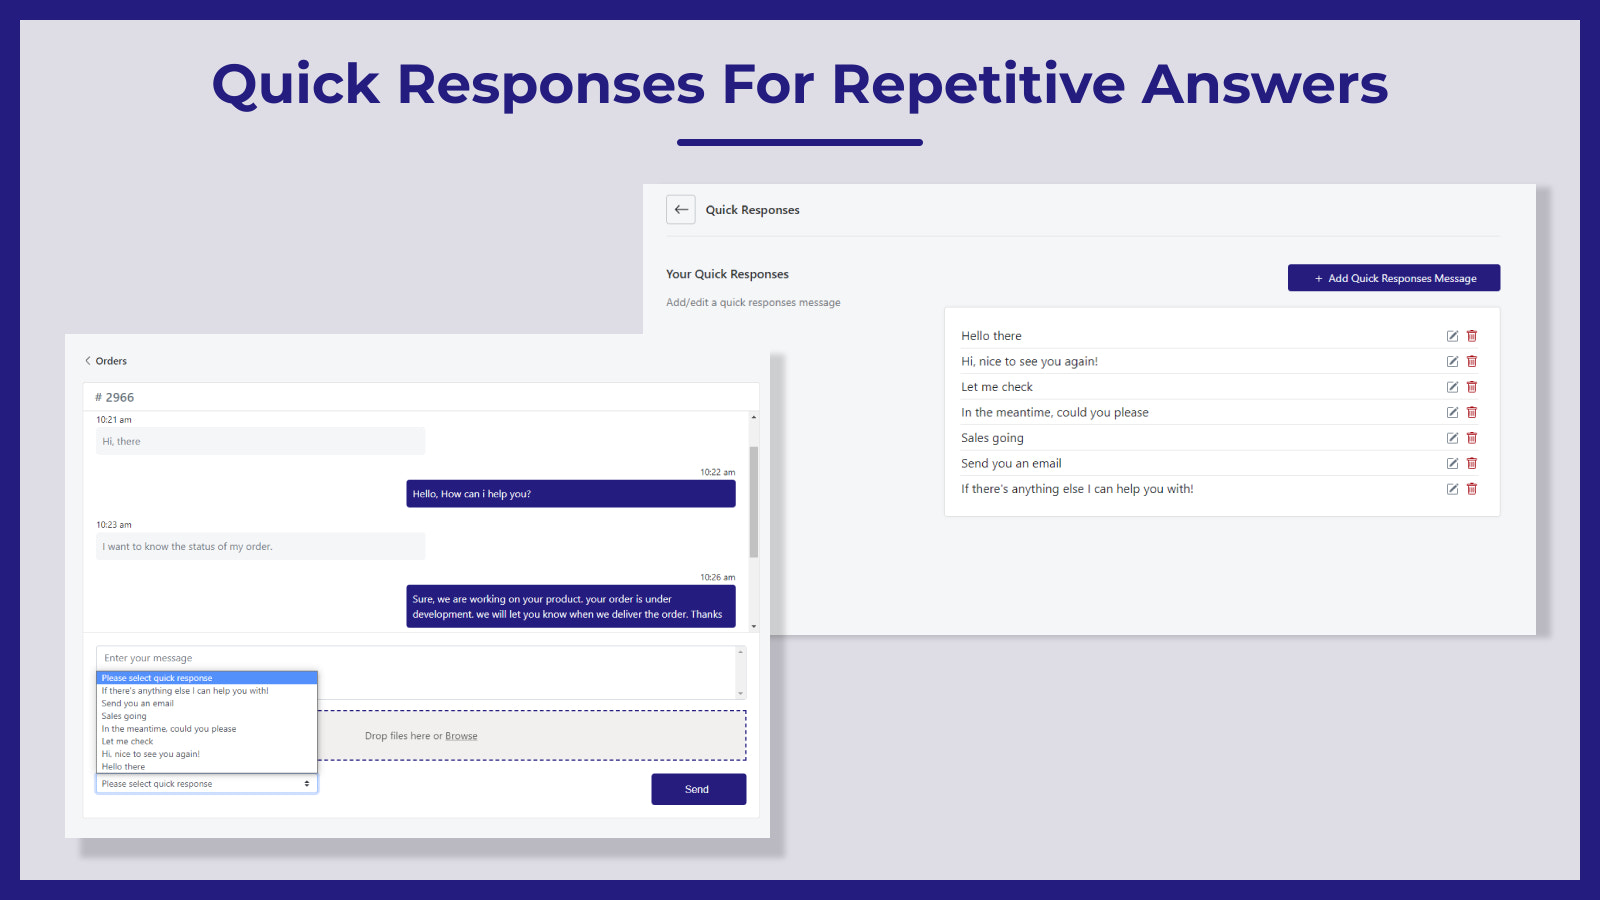 Quick Responses For Repetitive Answers